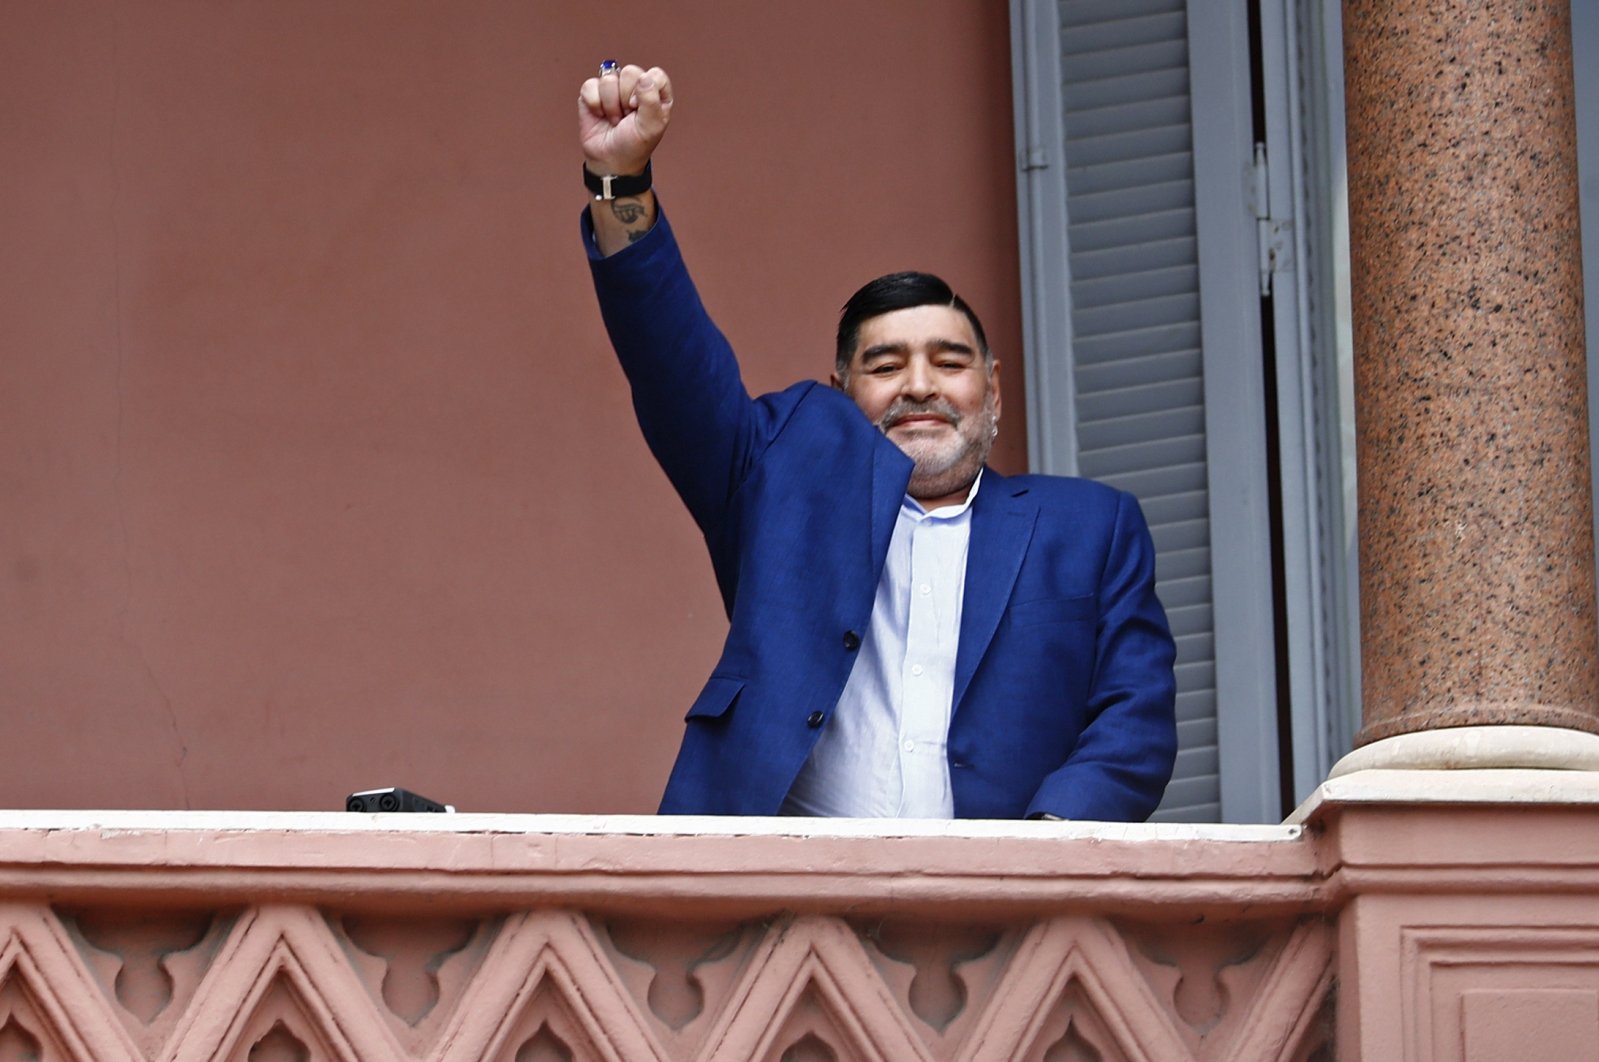 Diego Maradona acknowledges fans below at the Casa Rosada government house after his meeting with Argentine President Alberto Fernandez, Buenos Aires, Argentina, Dec. 26, 2019. (AP Photo)